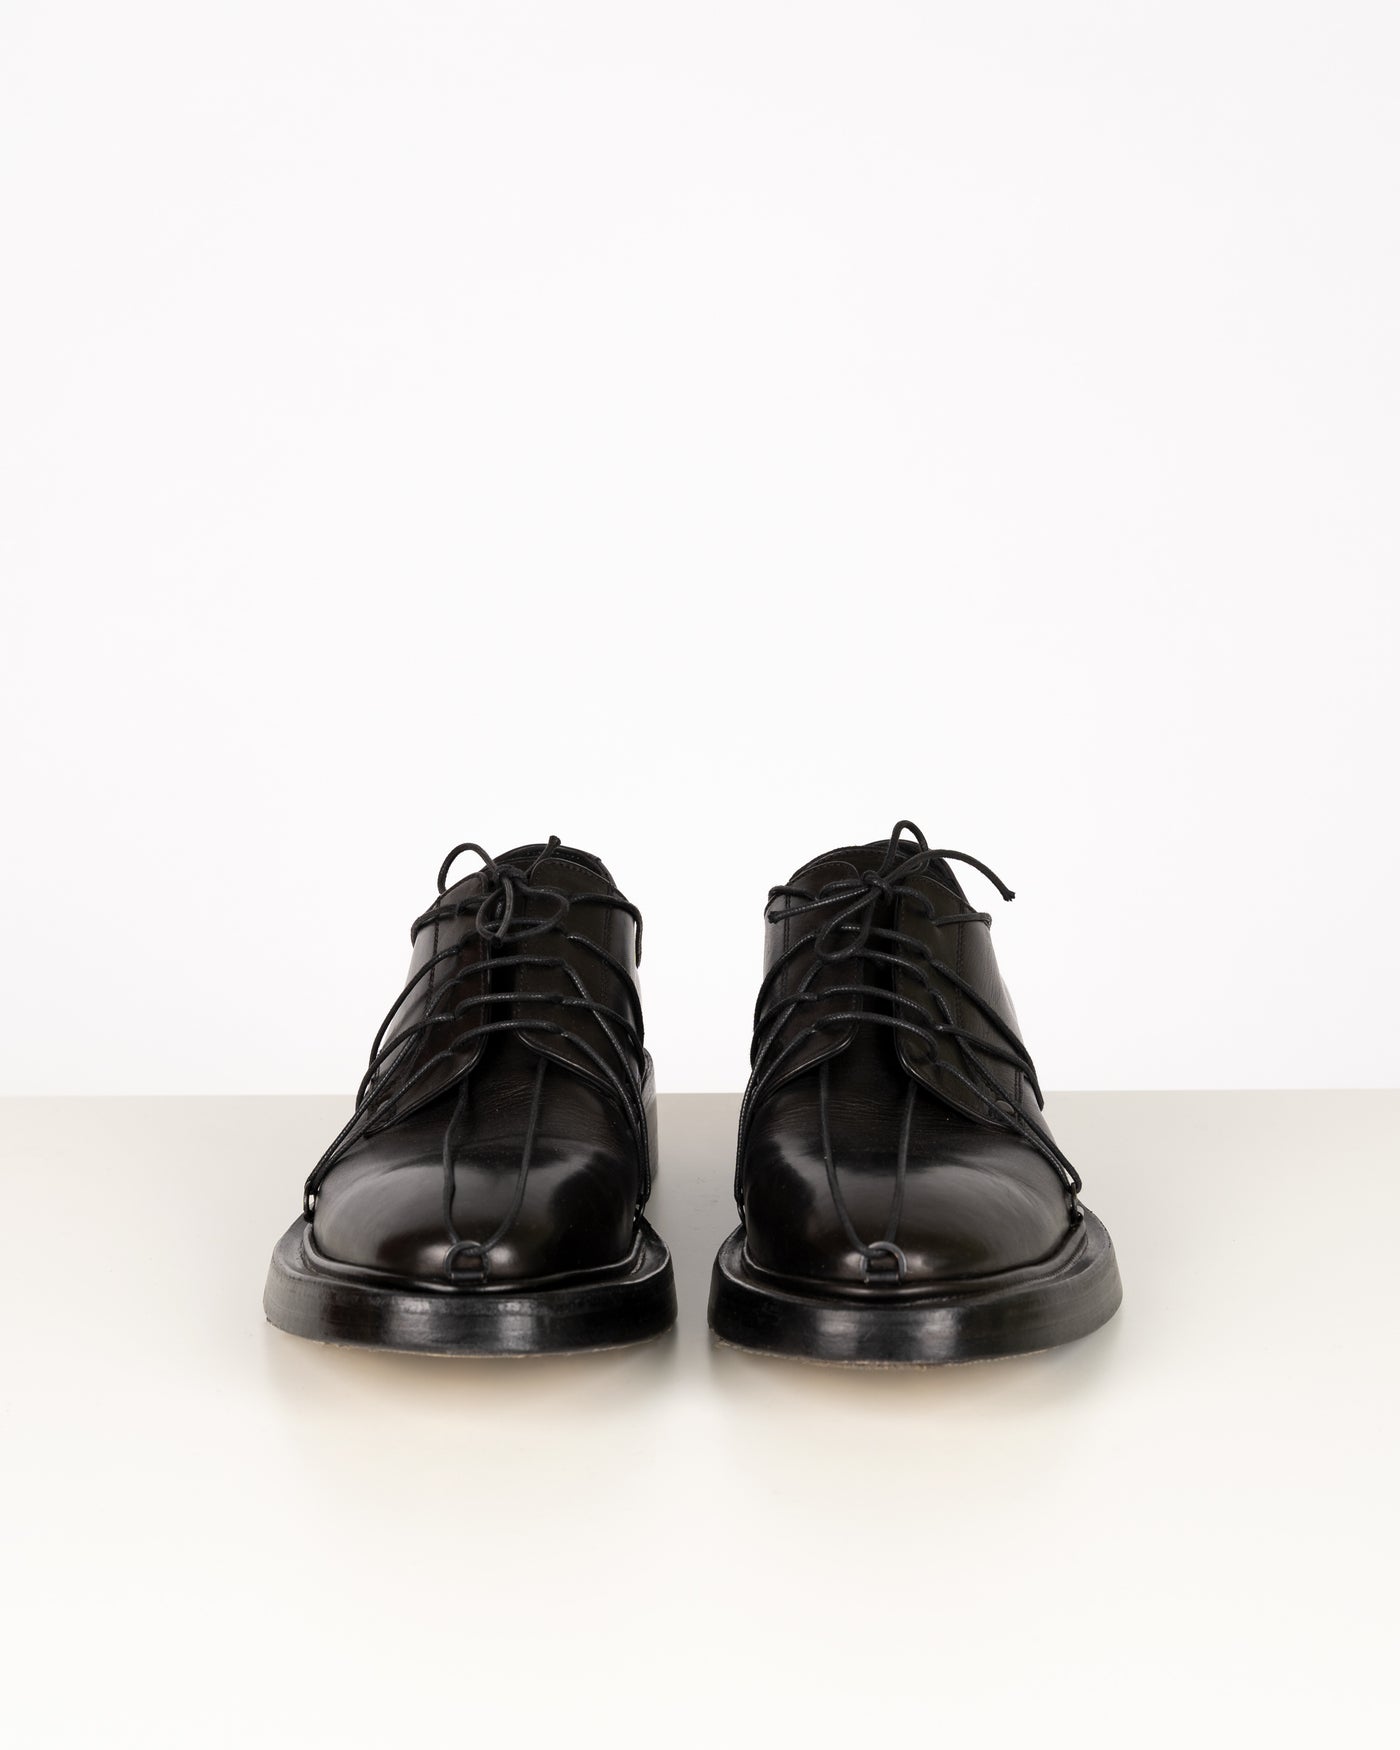 TRACTION OXFORDS